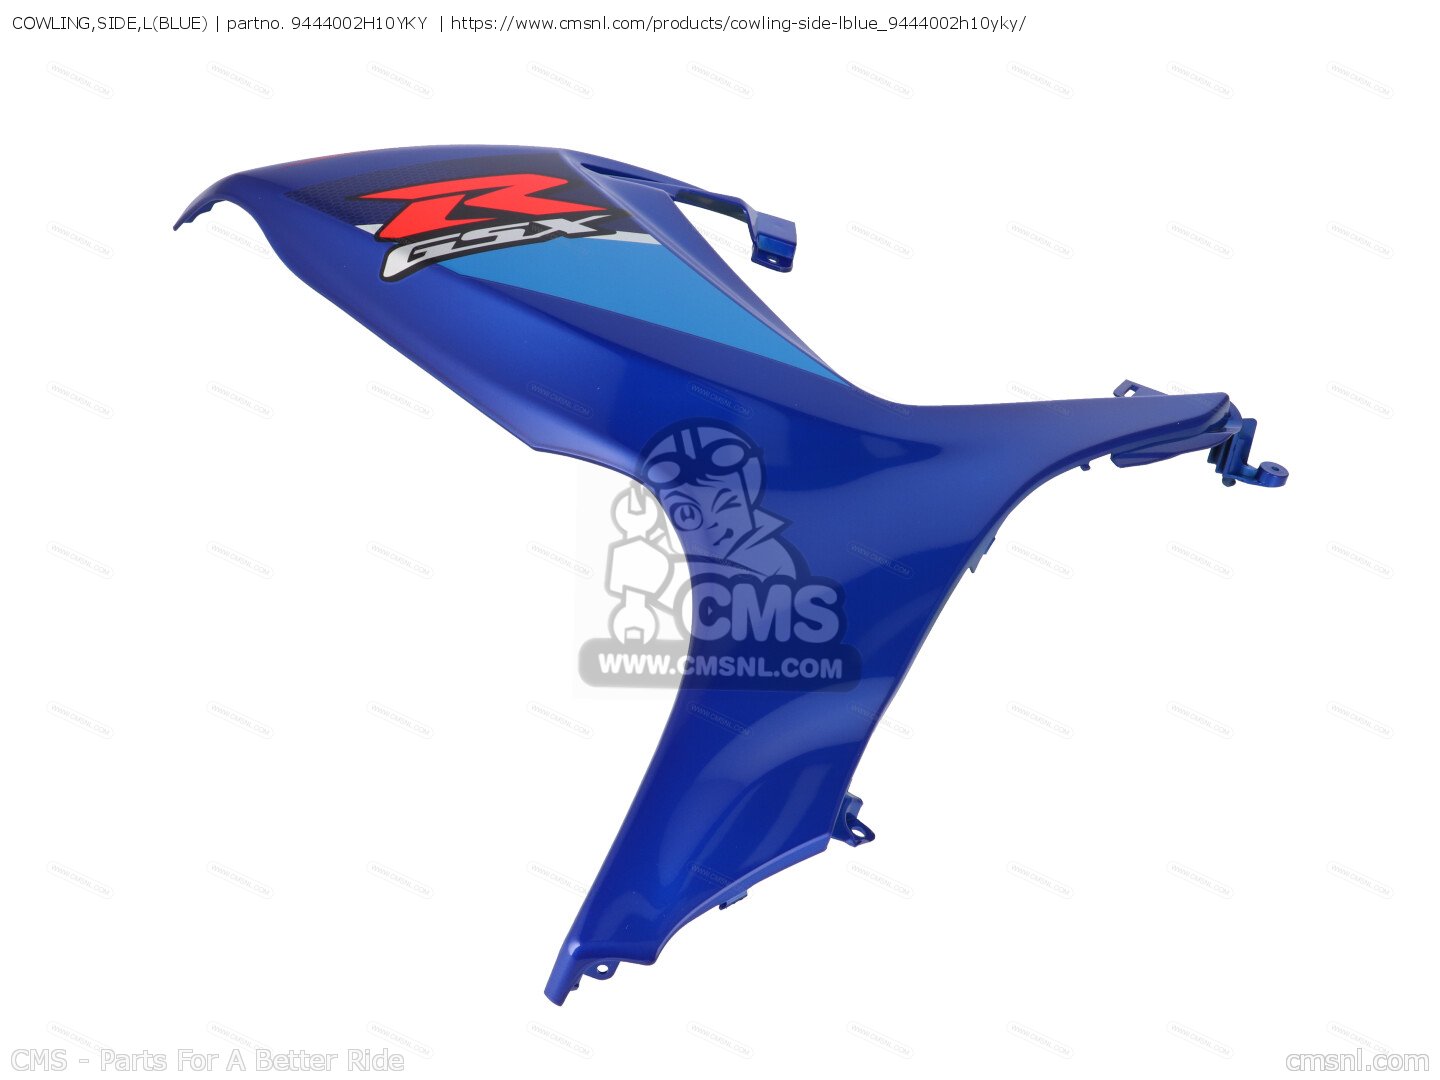 COWLING,SIDE,L(BLUE) for GSXR750 2007 (K7) USA (E03) - order at CMSNL